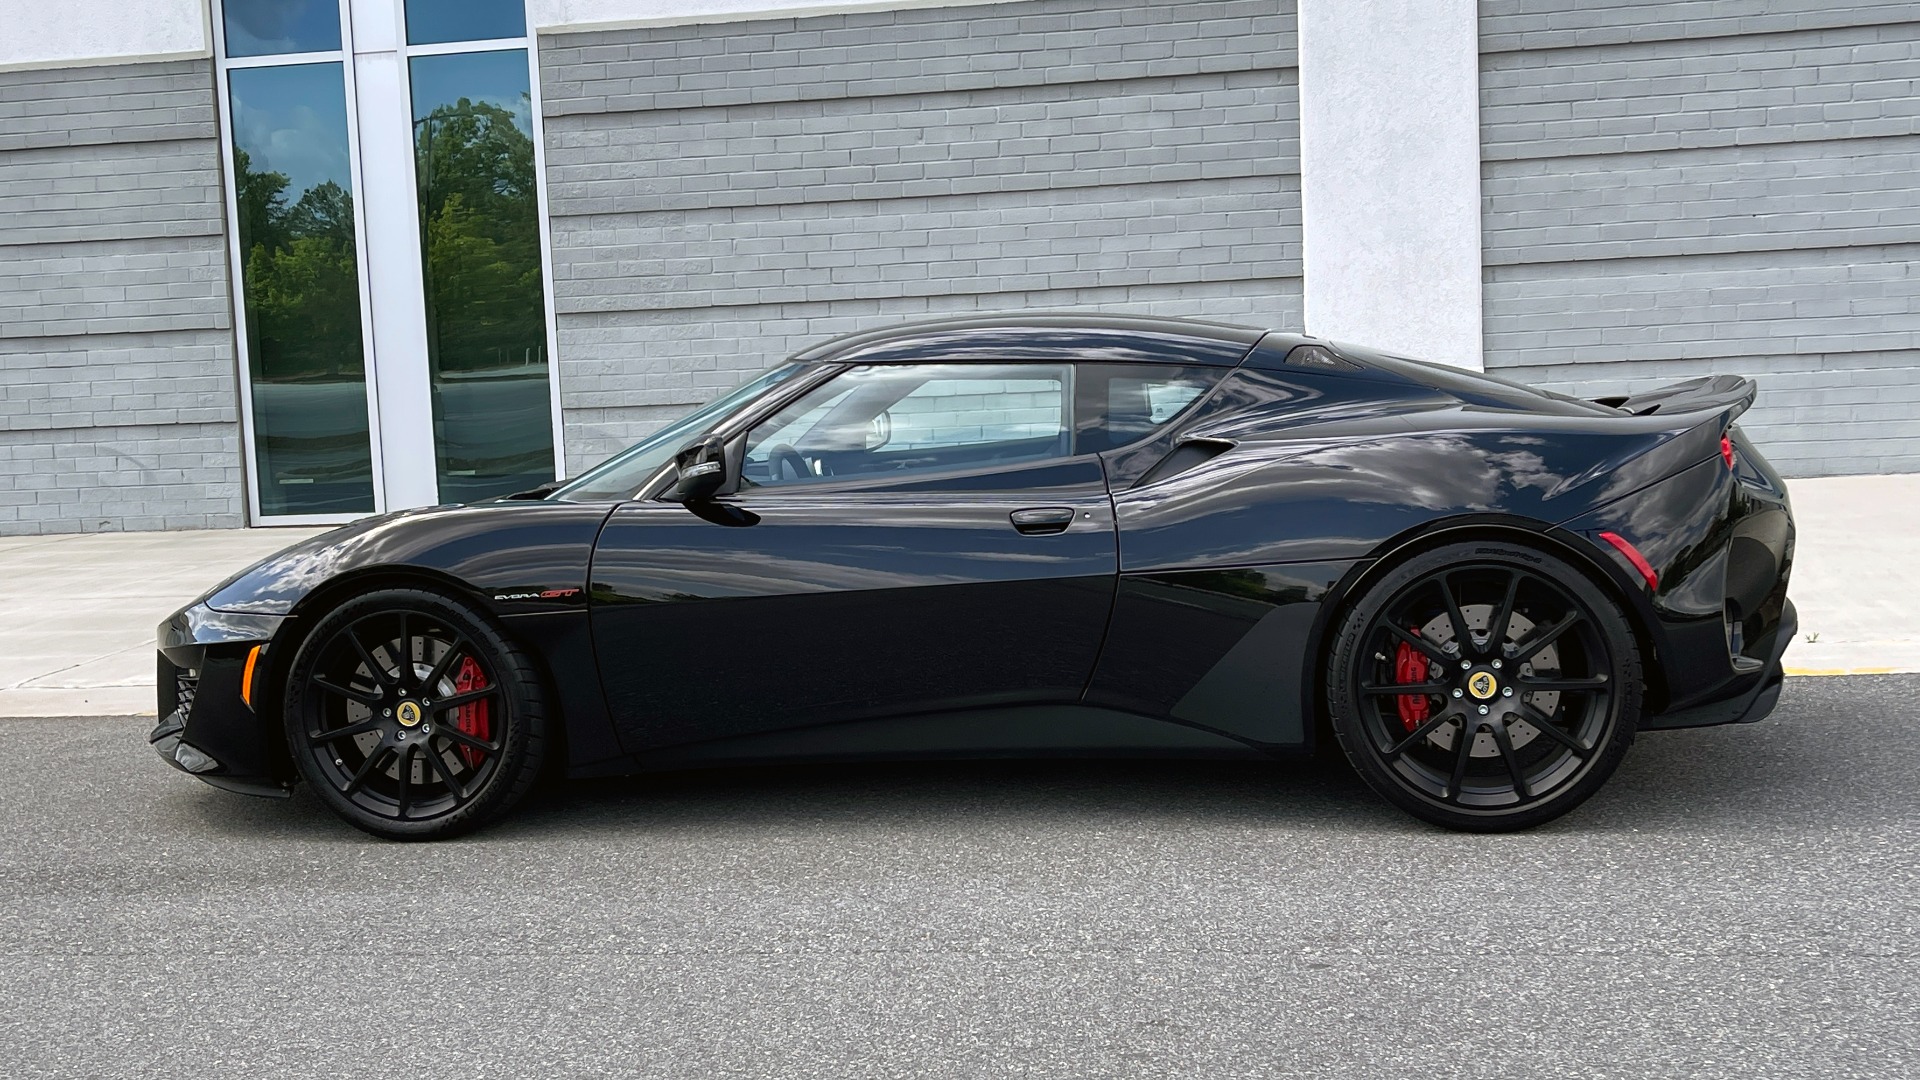 Used 2020 Lotus EVORA GT COUPE / 3.5L SC / NAV / ALPINE SND W/SUBWOOFER / REARVIEW for sale $102,895 at Formula Imports in Charlotte NC 28227 4